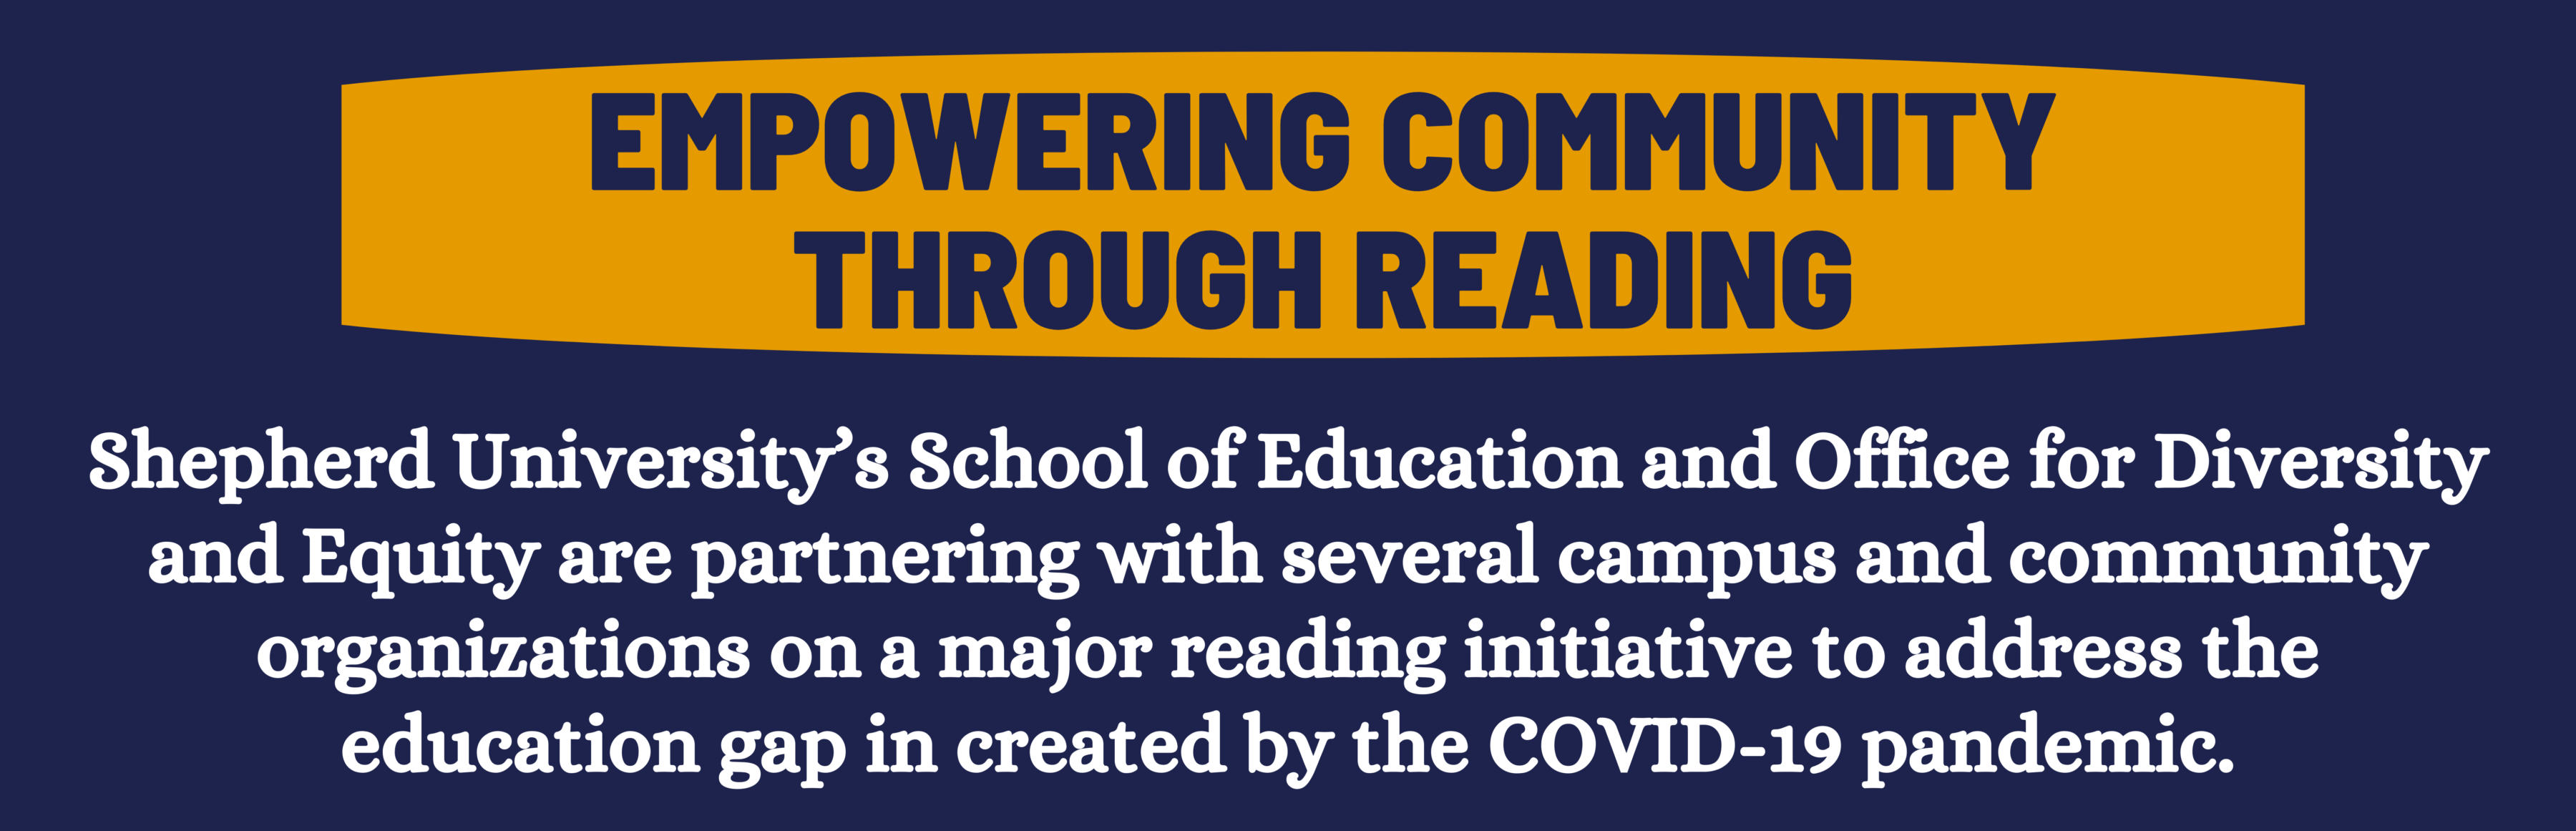 empowering community through reading. Shepherd University’s School of Education and Office for Diversity and Equity are partnering with several campus and community organizations on a major reading initiative to address the education gap in created by the COVID-19 pandemic.